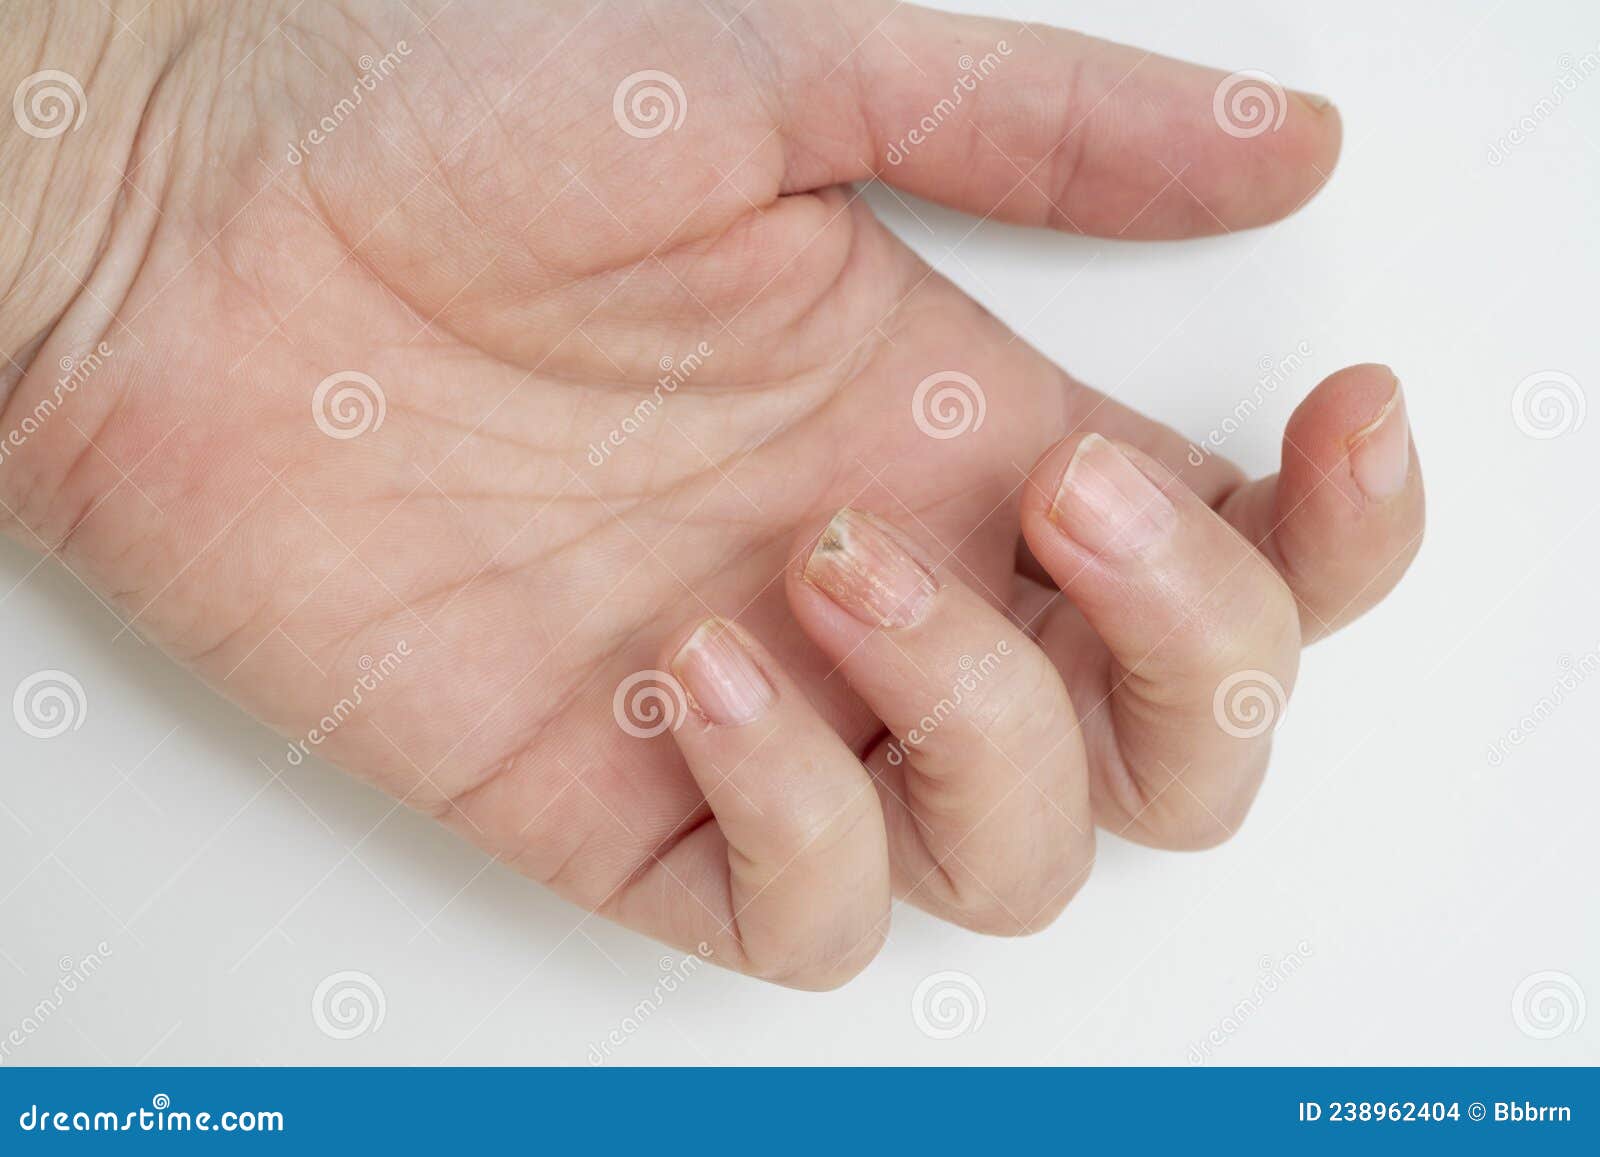 Closeup Hand of a Woman with Nail Fungus Stock Image - Image of health,  dirty: 261597461